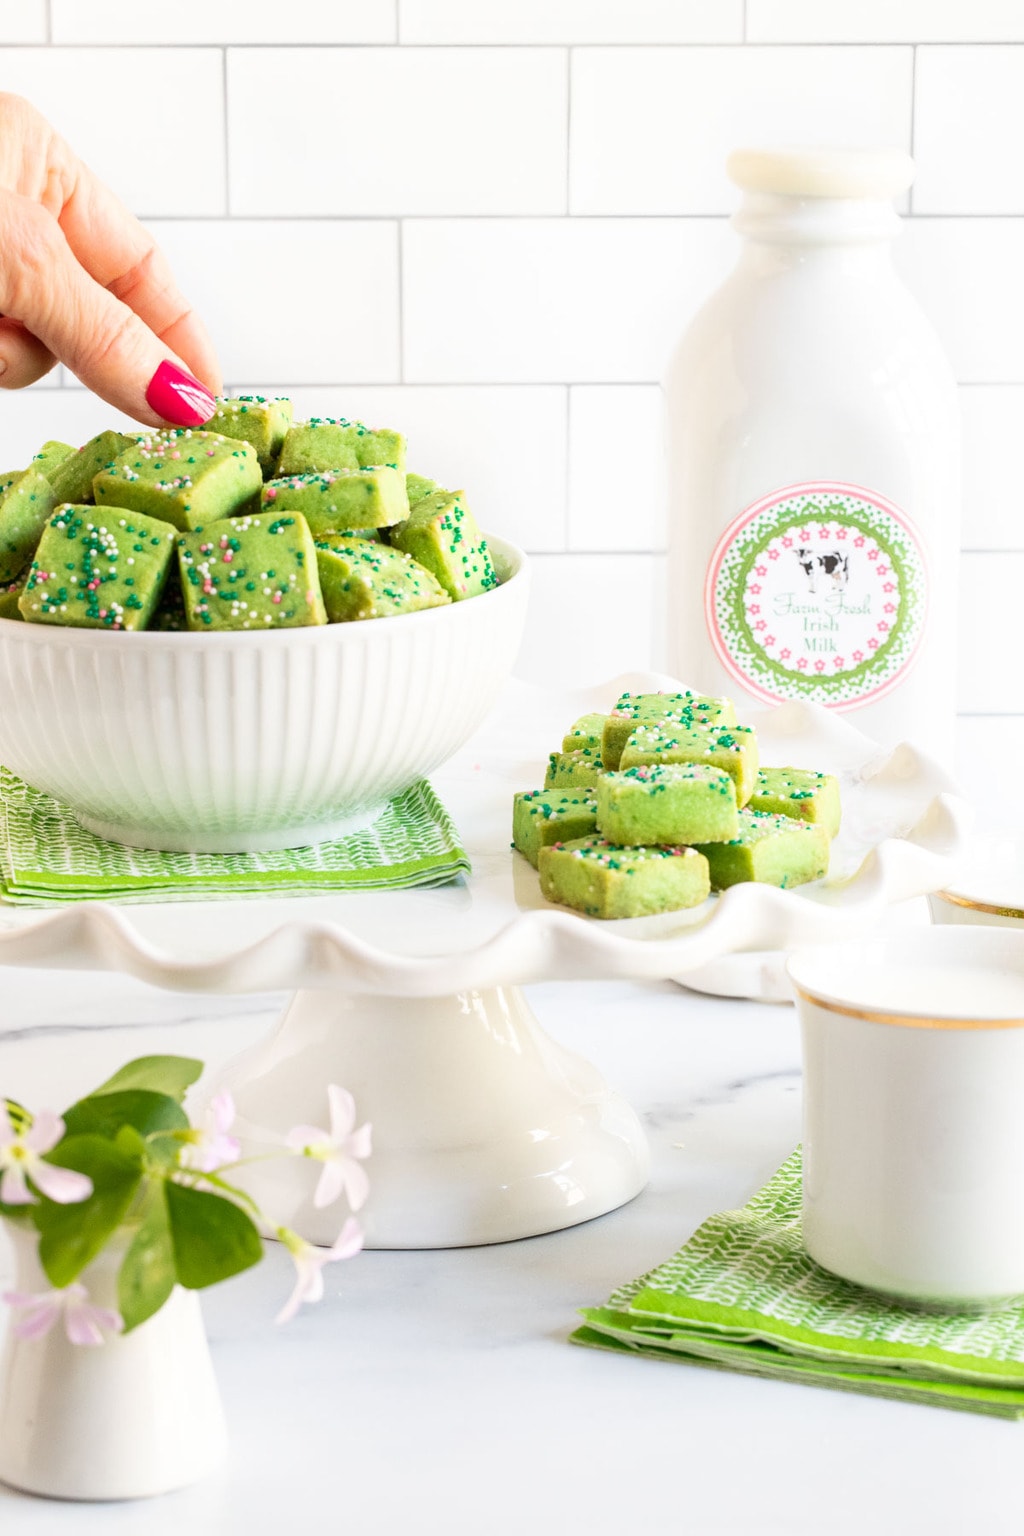 Vertical photo of a bowl of Leprechaun Shortbread Bites on a pedestal display stand with a shamrock plant in the foreground and a quart of Irish milk in the background. A hand is taking one of the shortbread bites.